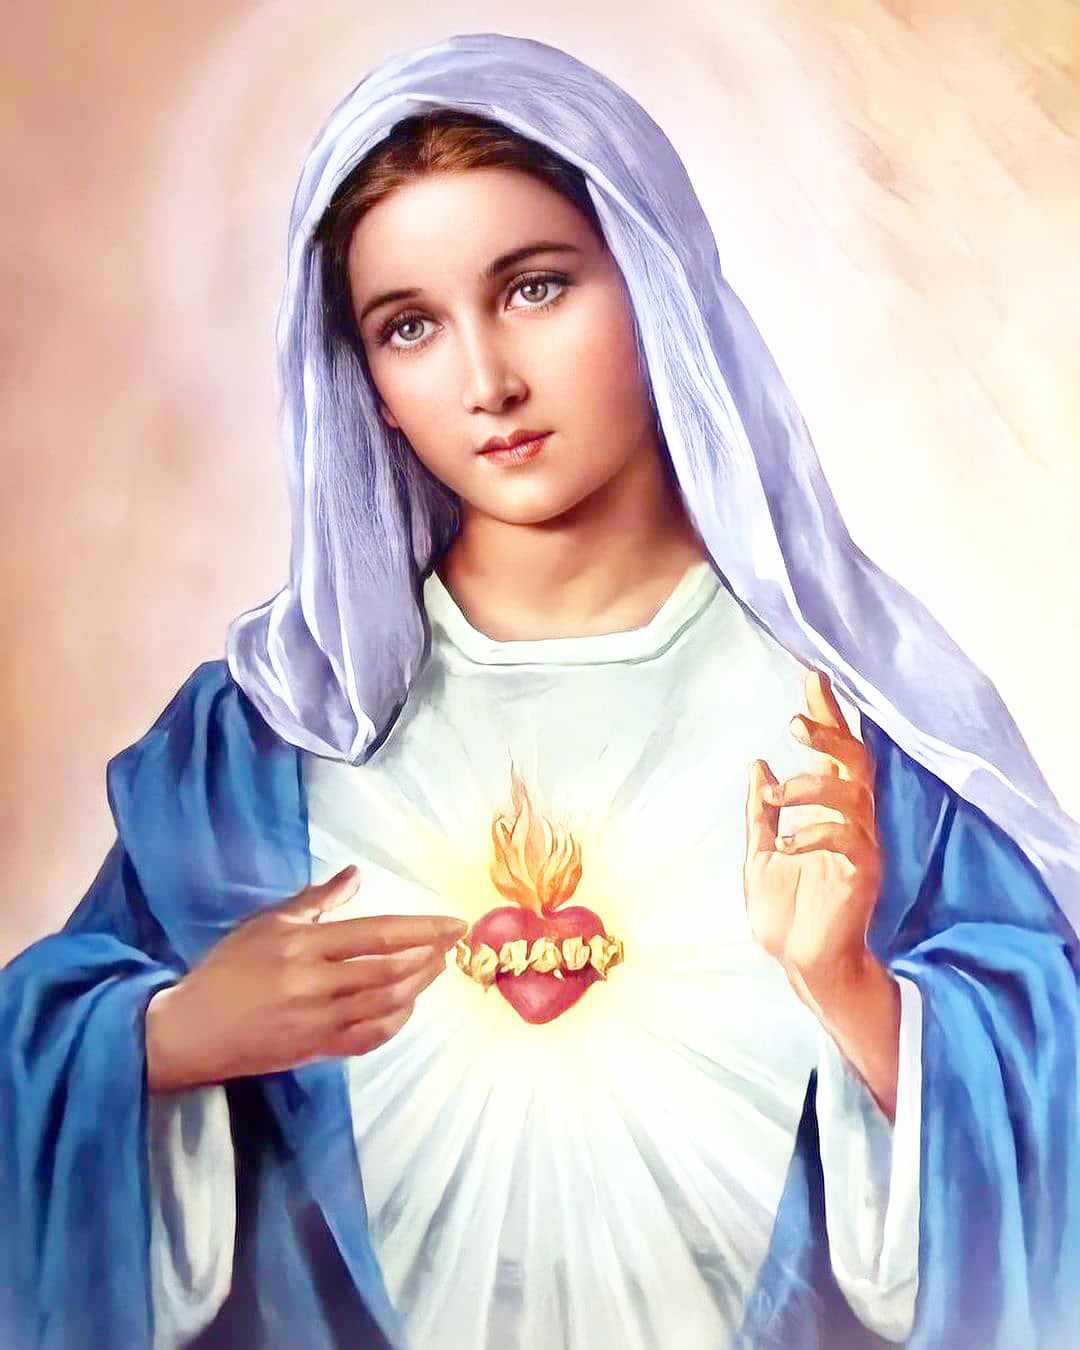 Immaculate Heart Mary